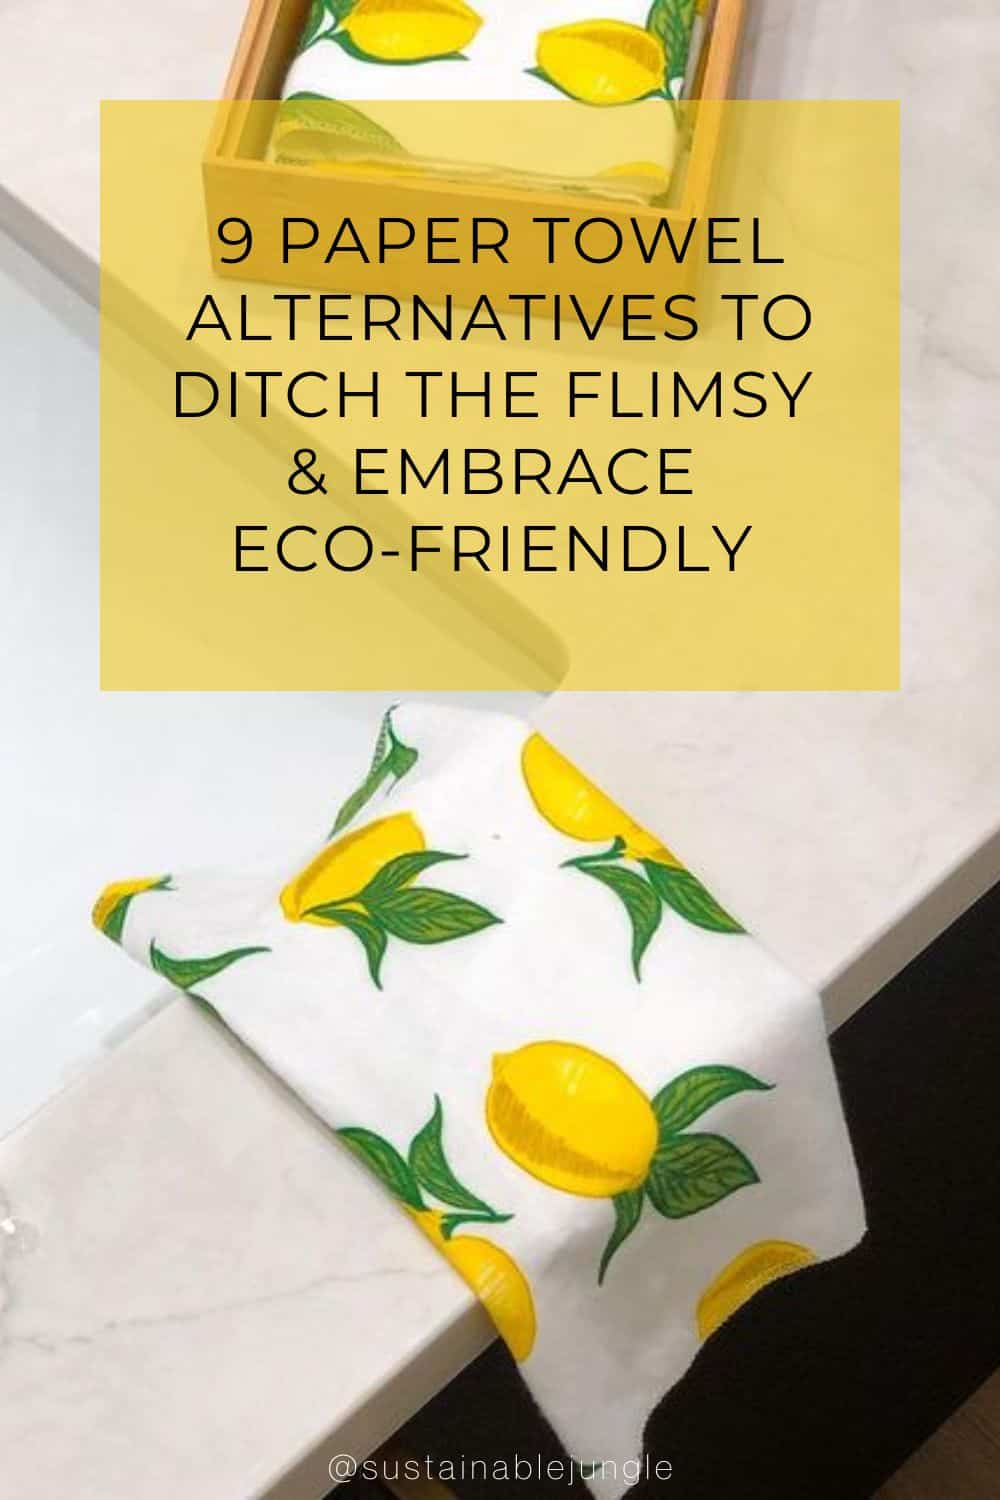 9 Paper Towel Alternatives To Ditch The Flimsy & Embrace Eco-Friendly Image by Earthly Co #papertowelalternatives #papertowelreplacements #bestpapertowelalternative #whattouseinsteadofpapertowels #swedishpapertowelalternative #sustainablejungle